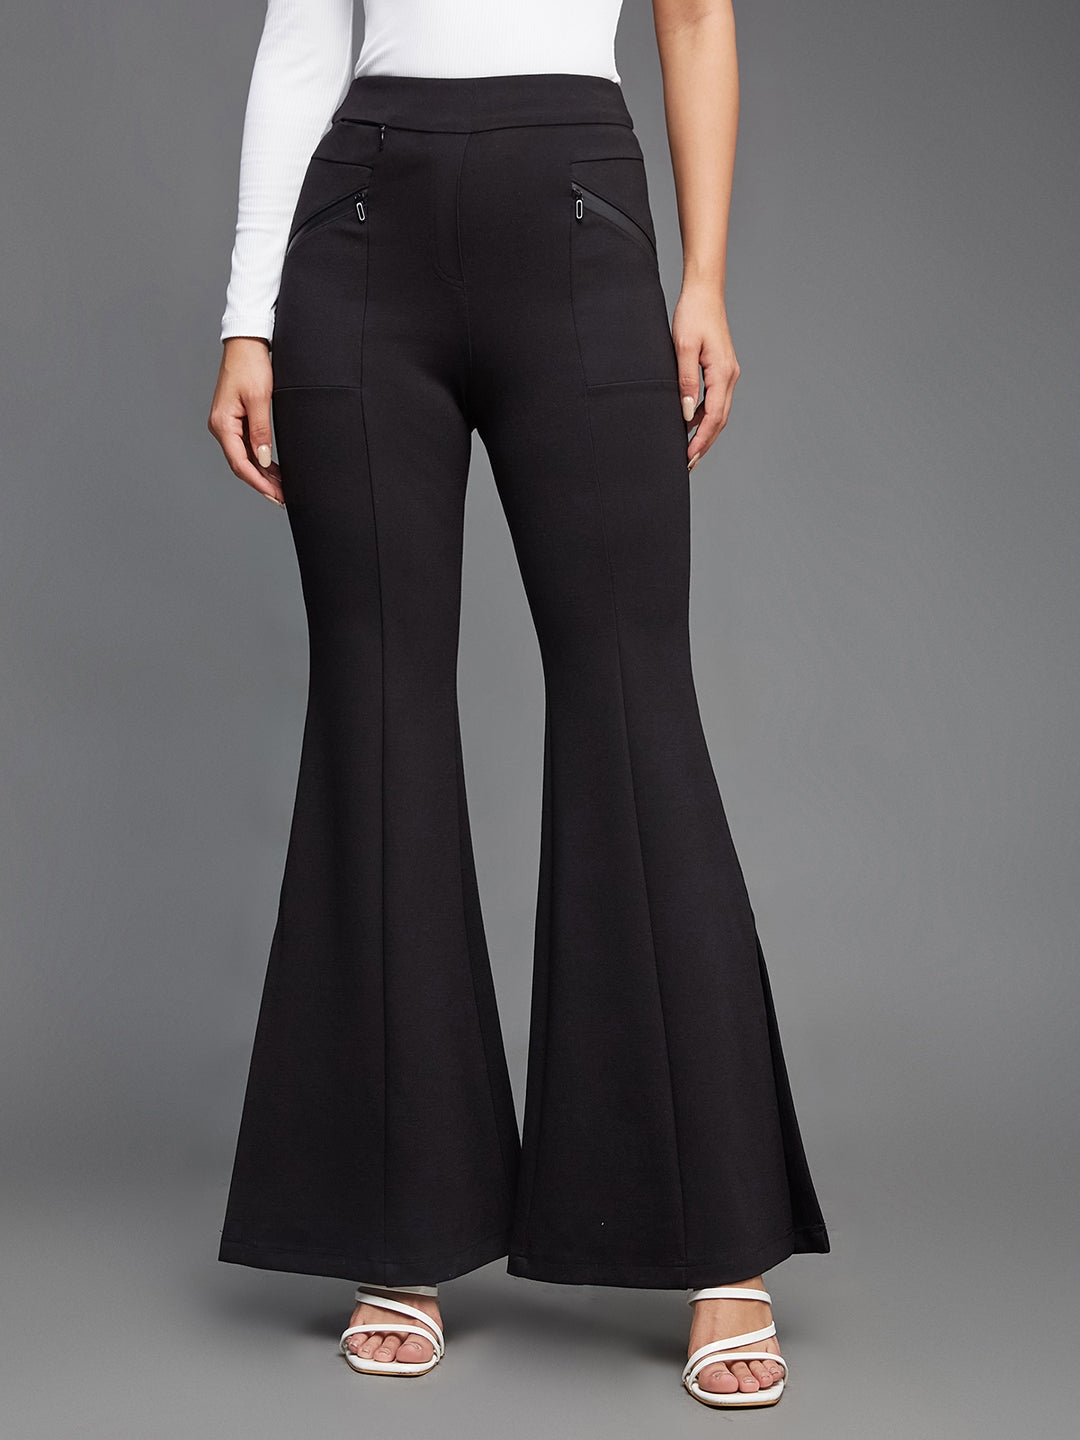 MISS CHASE | Women's Black  Trousers